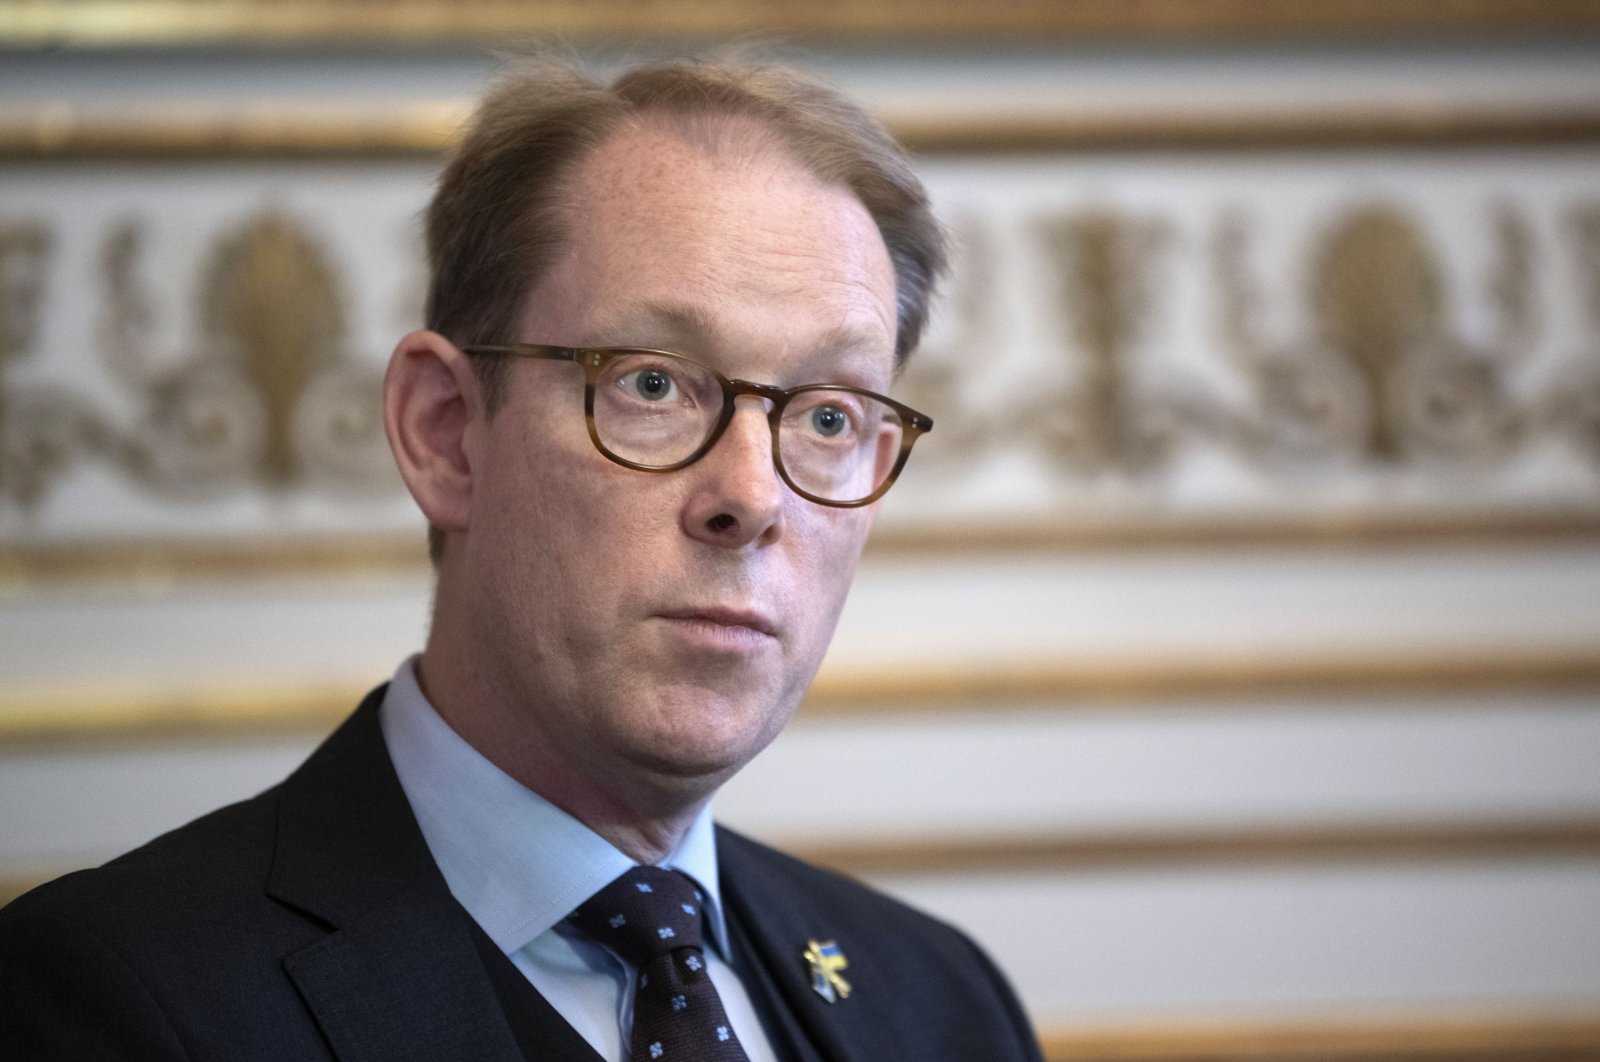 Swedish Foreign Minister Tobias Billstrom is interviewed at the Ministry of Foreign Affairs in Stockholm, Sweden, Oct. 24, 2022. (AP Photo)